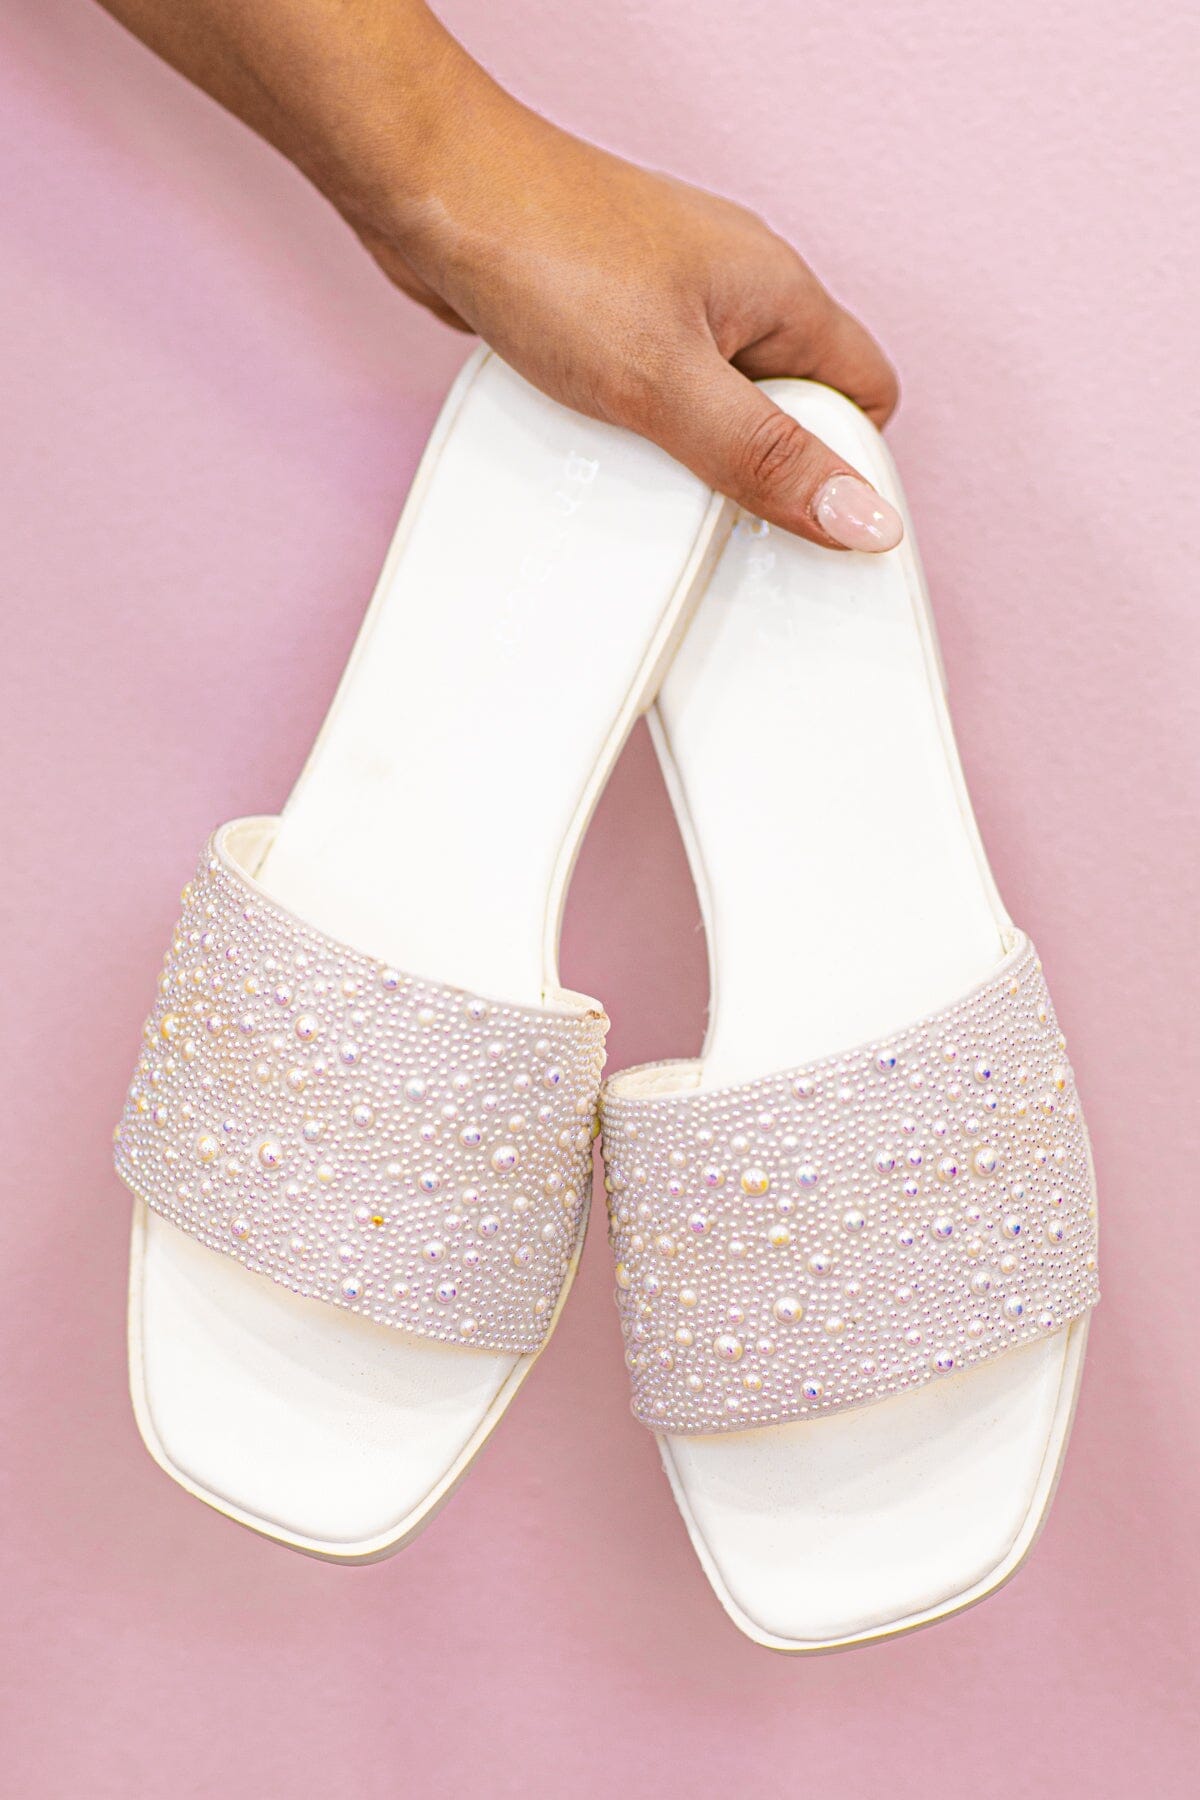 White Sandals With Pearl Detail - Filly Flair